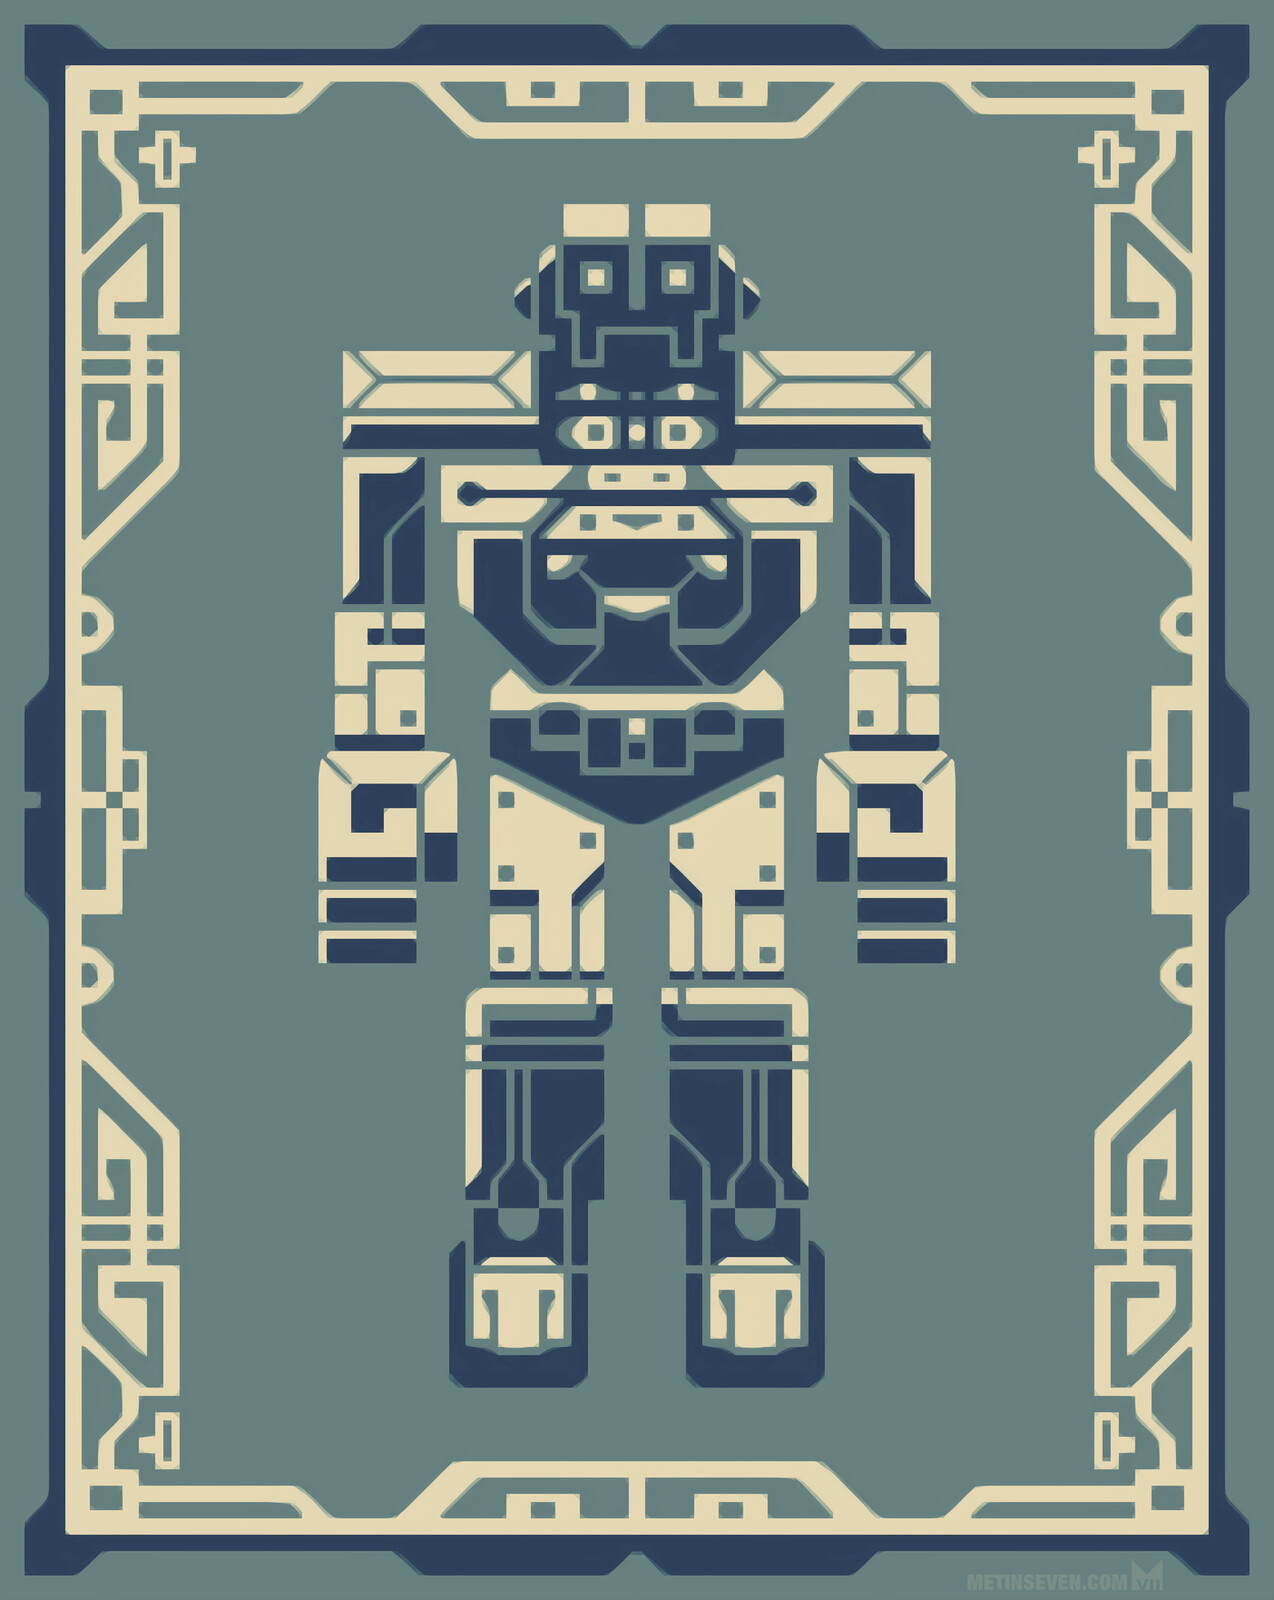 Mecha / robot character illustration in a stylized graphic design style